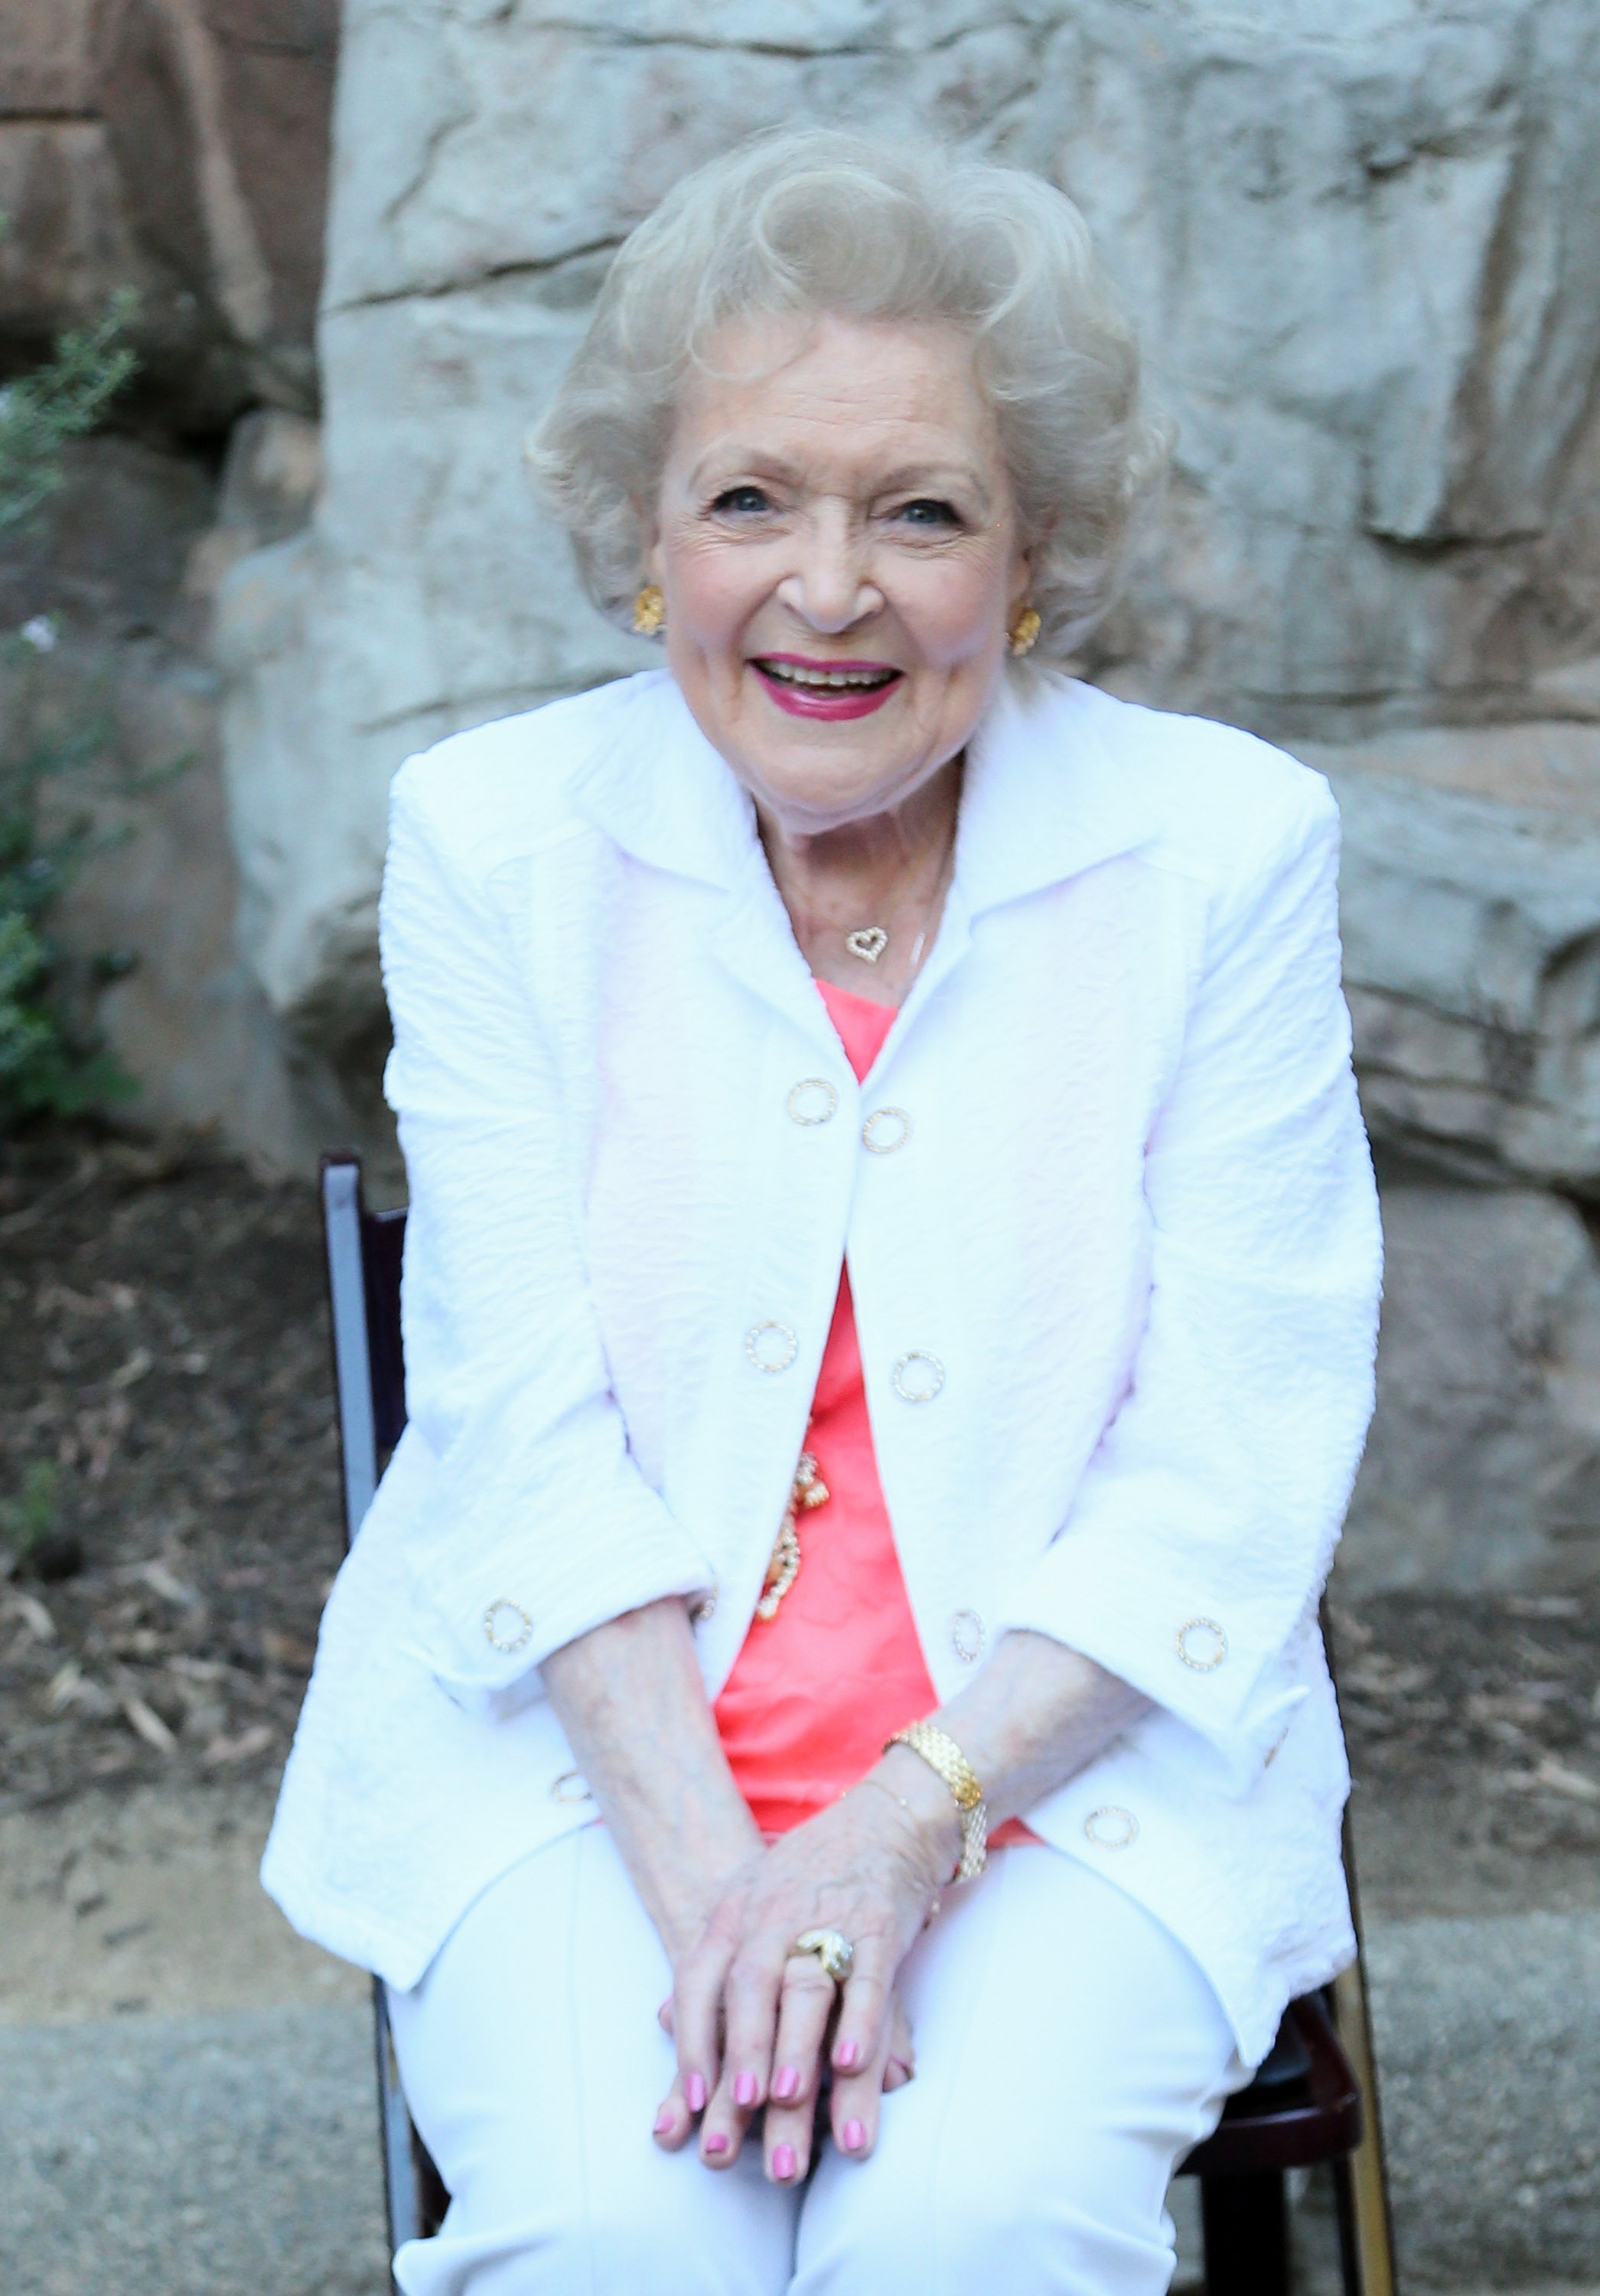 Betty White. I Image: Getty Images.